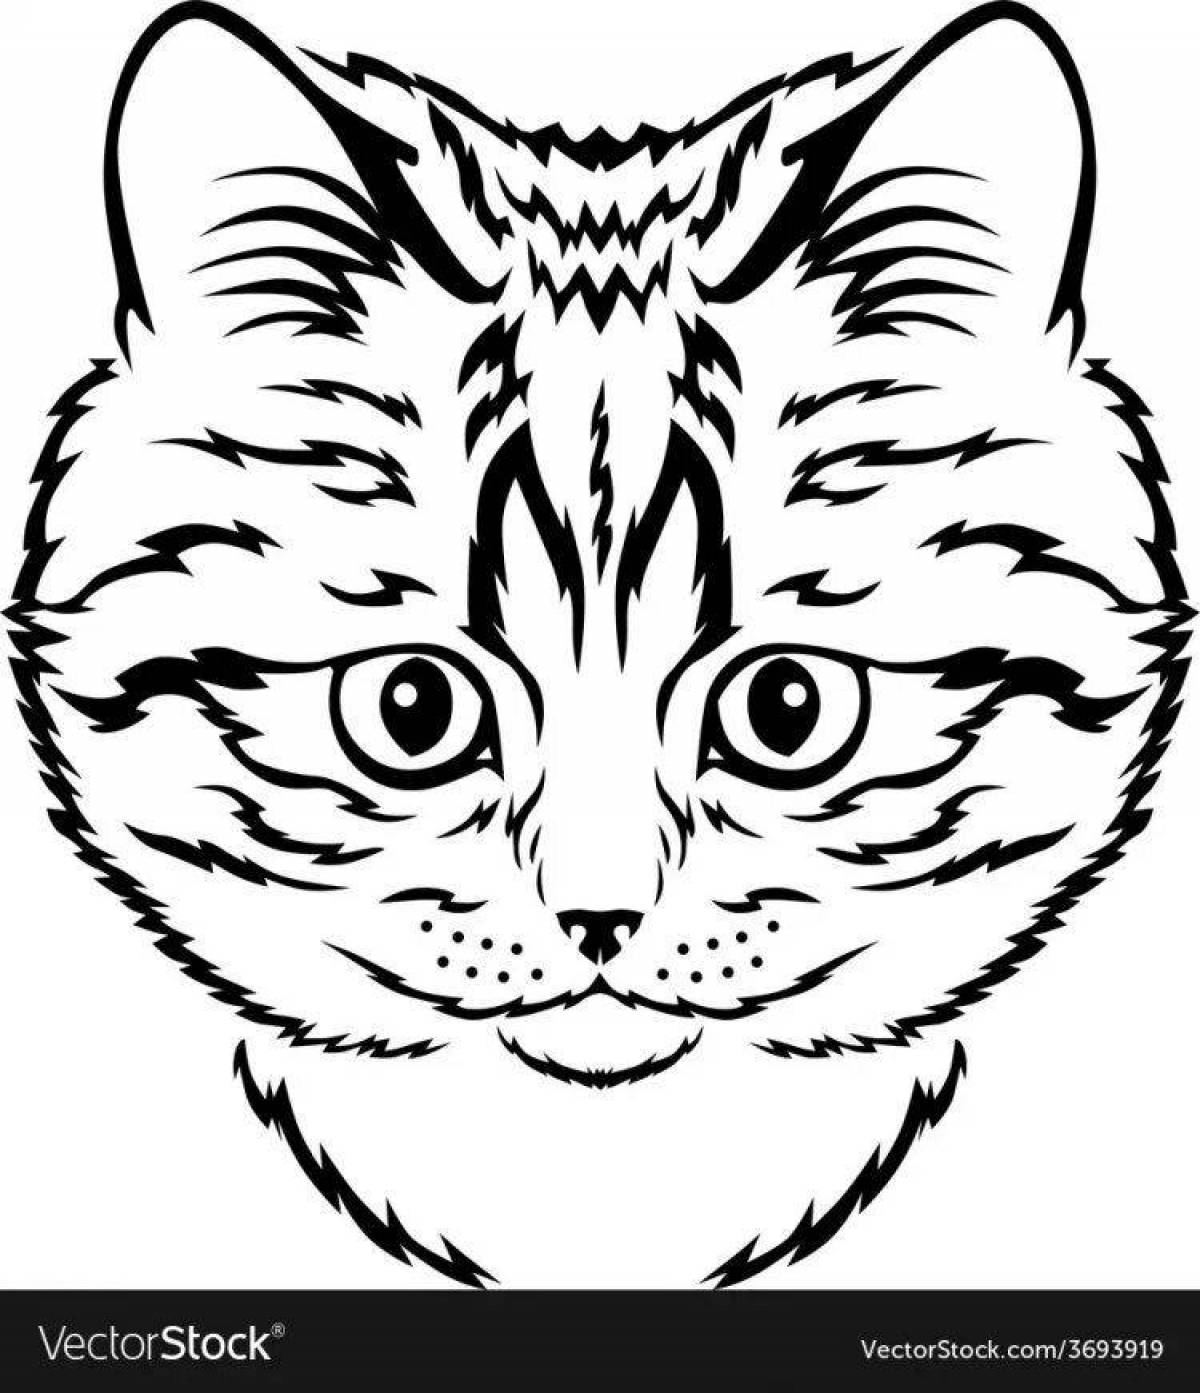 Silly cat face coloring book